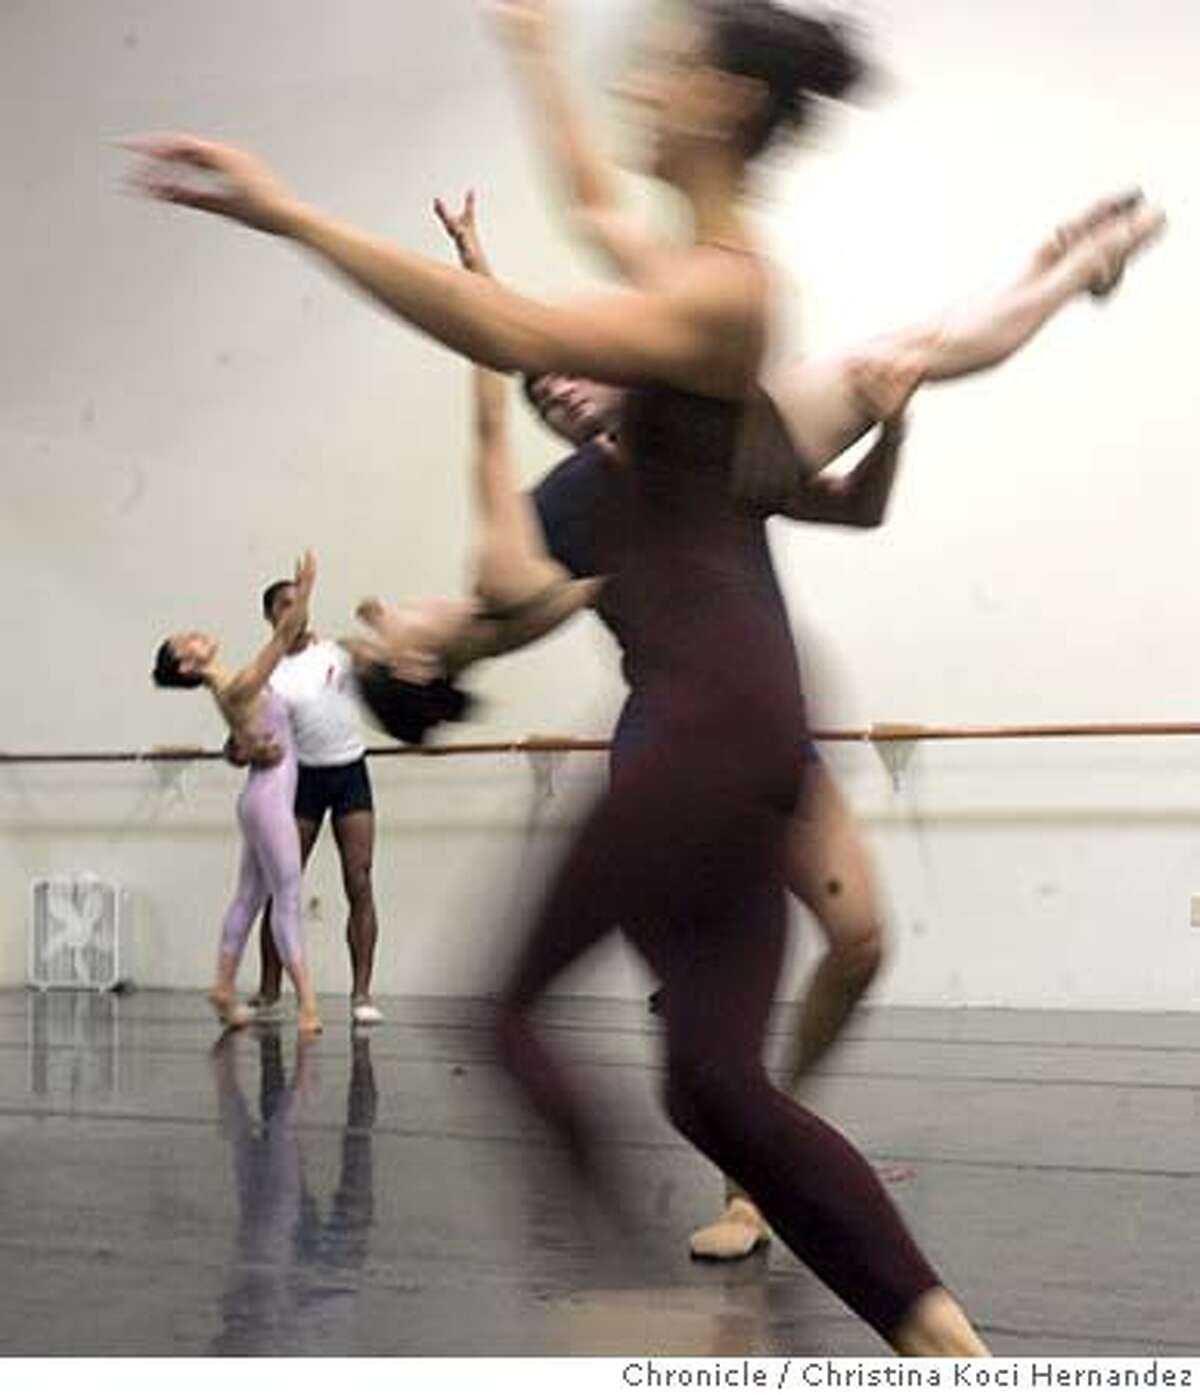 CHRISTINA KOCI HERNANDEZ/CHRONICLE (center couple) Carlos Venturo holds Phaedra Jarrett during rehearsal of "Double Happiness."The Oakland Ballet went into hibernation last year due to financial problems. Now the company is preparing to come back with a gala on Oct. Our story will be about the rise and fall and maybe rise of the Oakland Ballet as well as a profile of its artistic Director Karen Brown, a former principal with Dance Theater of Harlem who has sacrificed financial success for this company. We shoot a rehearsal of dancers as well as candid and profile shots of Karen Brown and other persons who might be important to story.